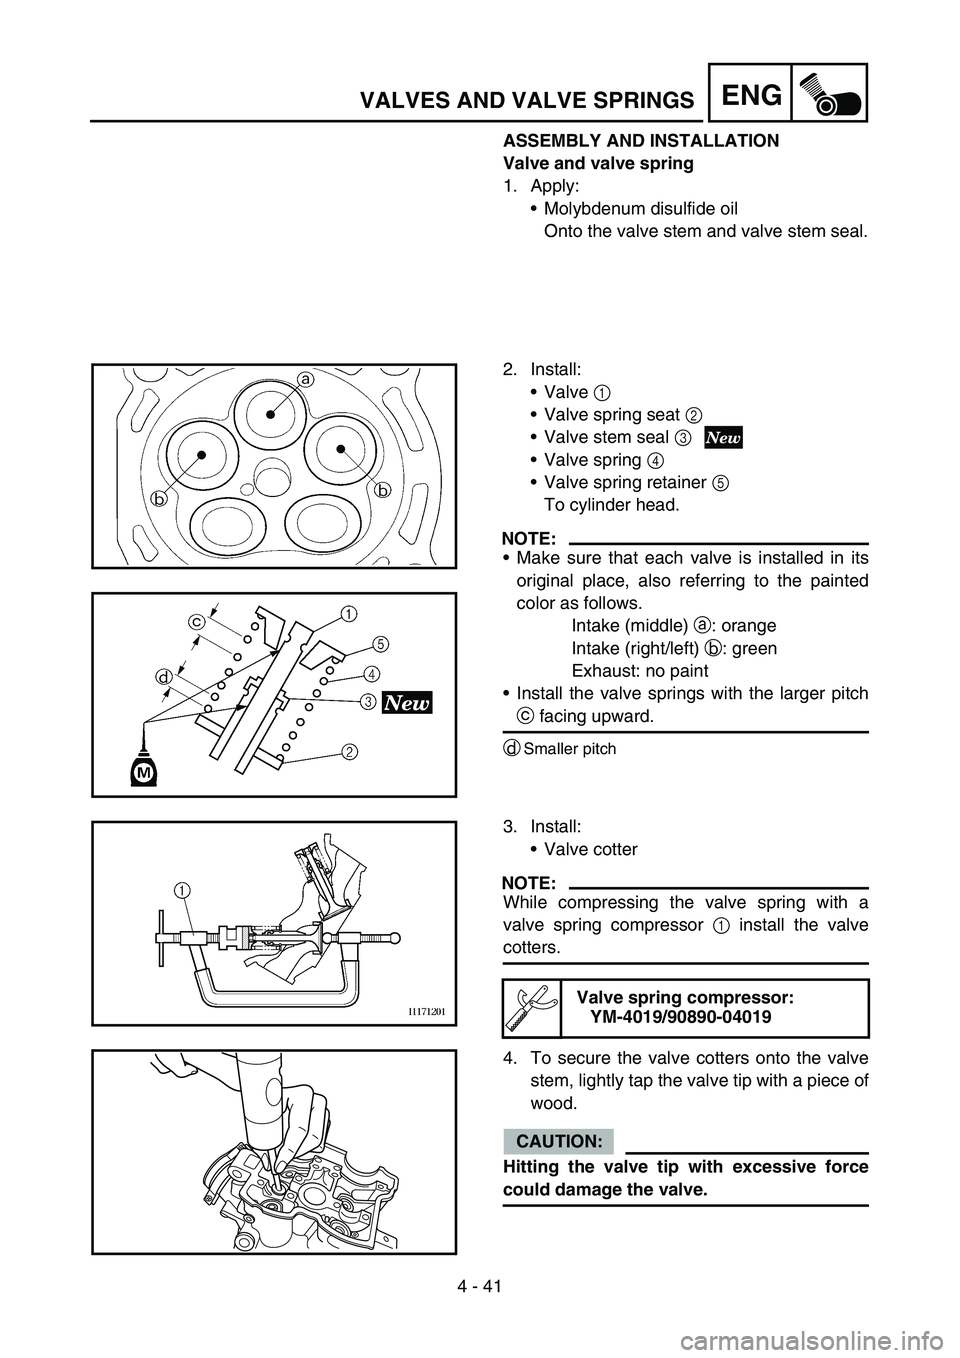 YAMAHA YZ250F 2007  Owners Manual 4 - 41
ENGVALVES AND VALVE SPRINGS
ASSEMBLY AND INSTALLATION
Valve and valve spring
1. Apply:
Molybdenum disulfide oil
Onto the valve stem and valve stem seal.
2. Install:
Valve 1 
Valve spring sea